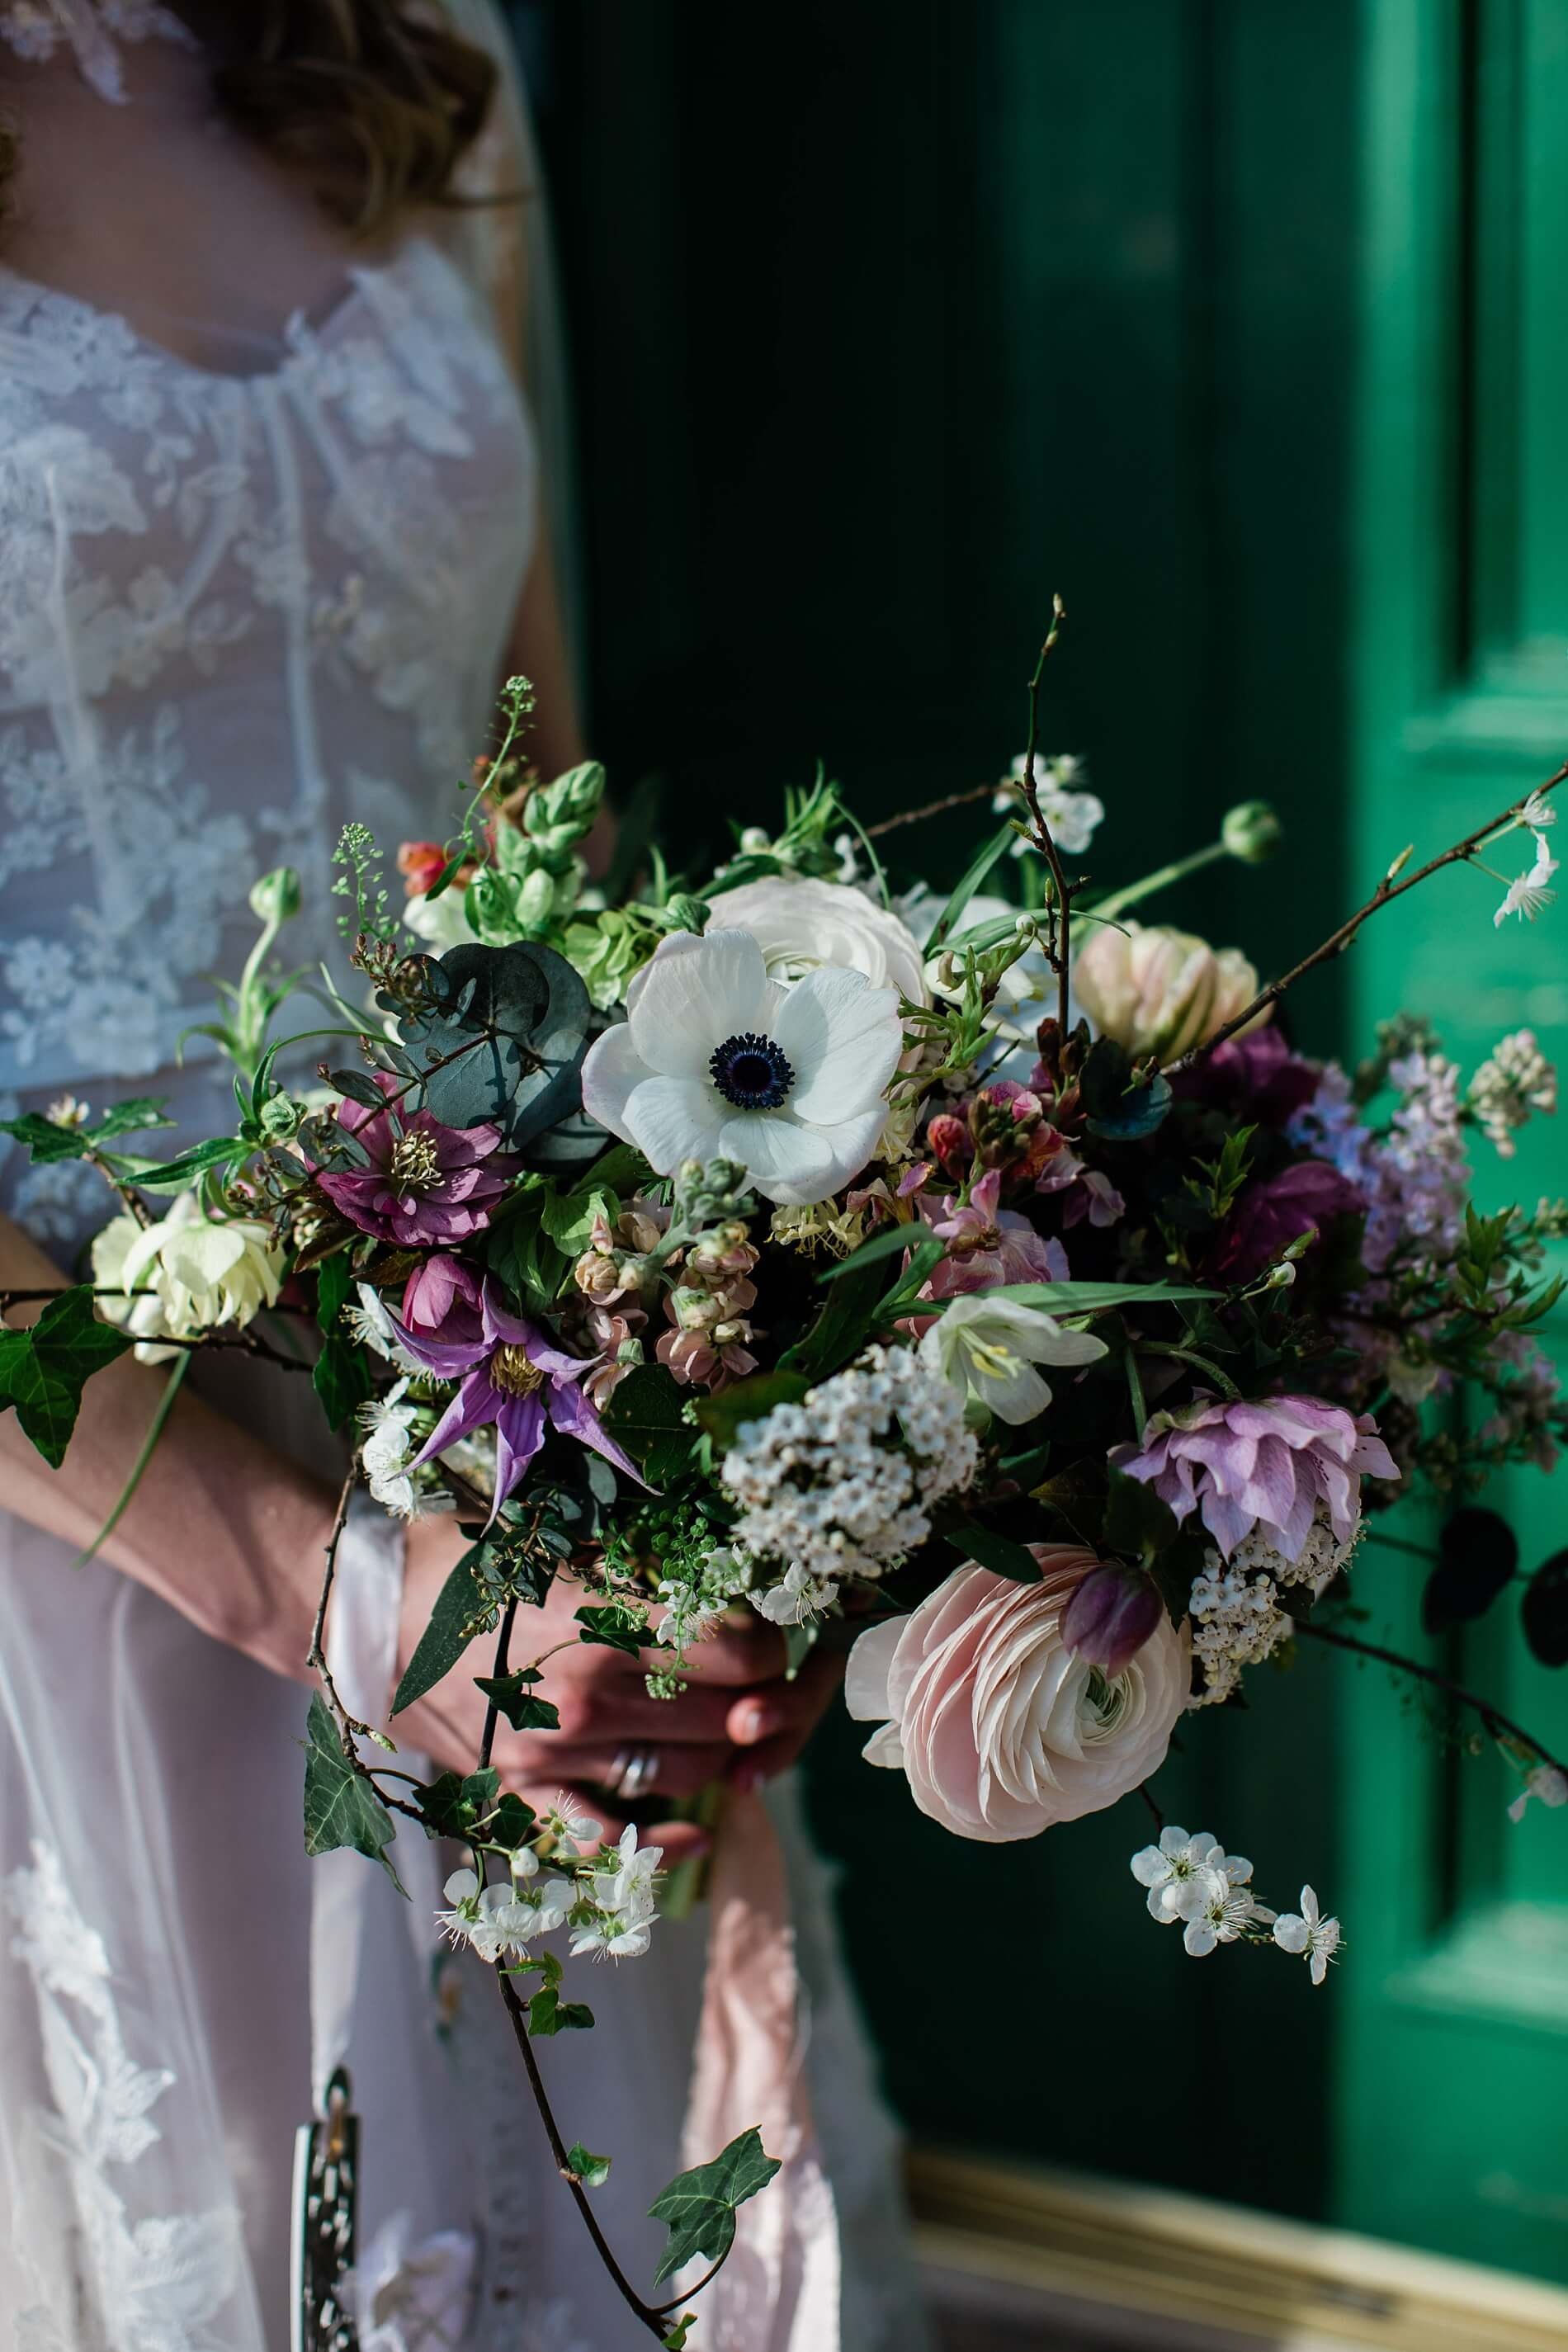 Alice & James' Spring Wedding at The Rhynd St Andrews — Sustainable Wild Flower Wedding and Funeral Flowers by Briar Rose Design